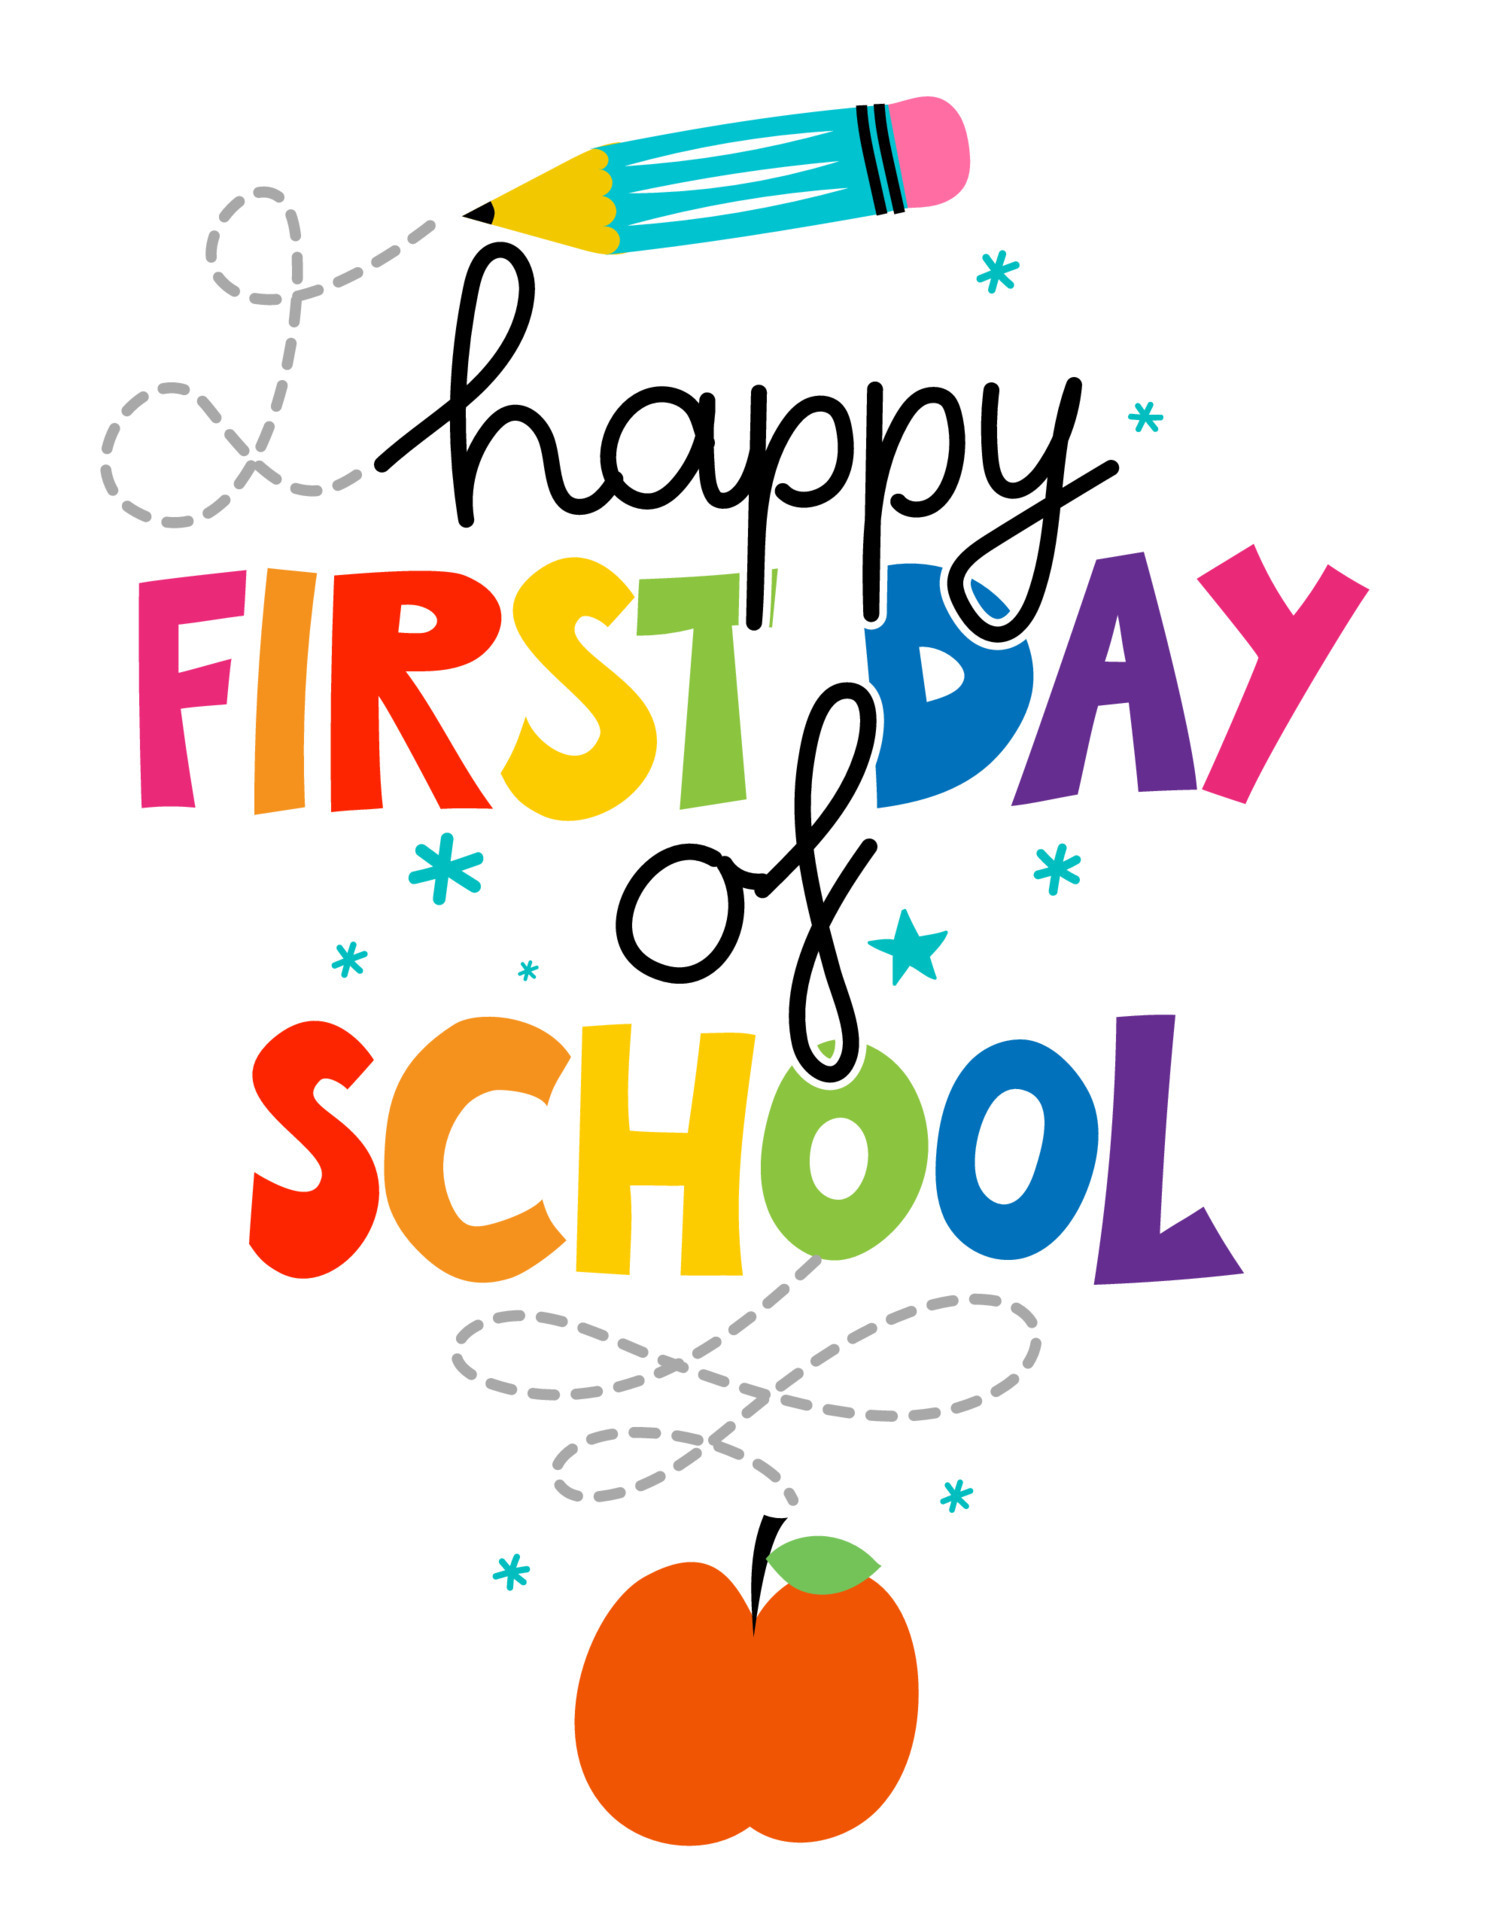 Happy First Day of School!